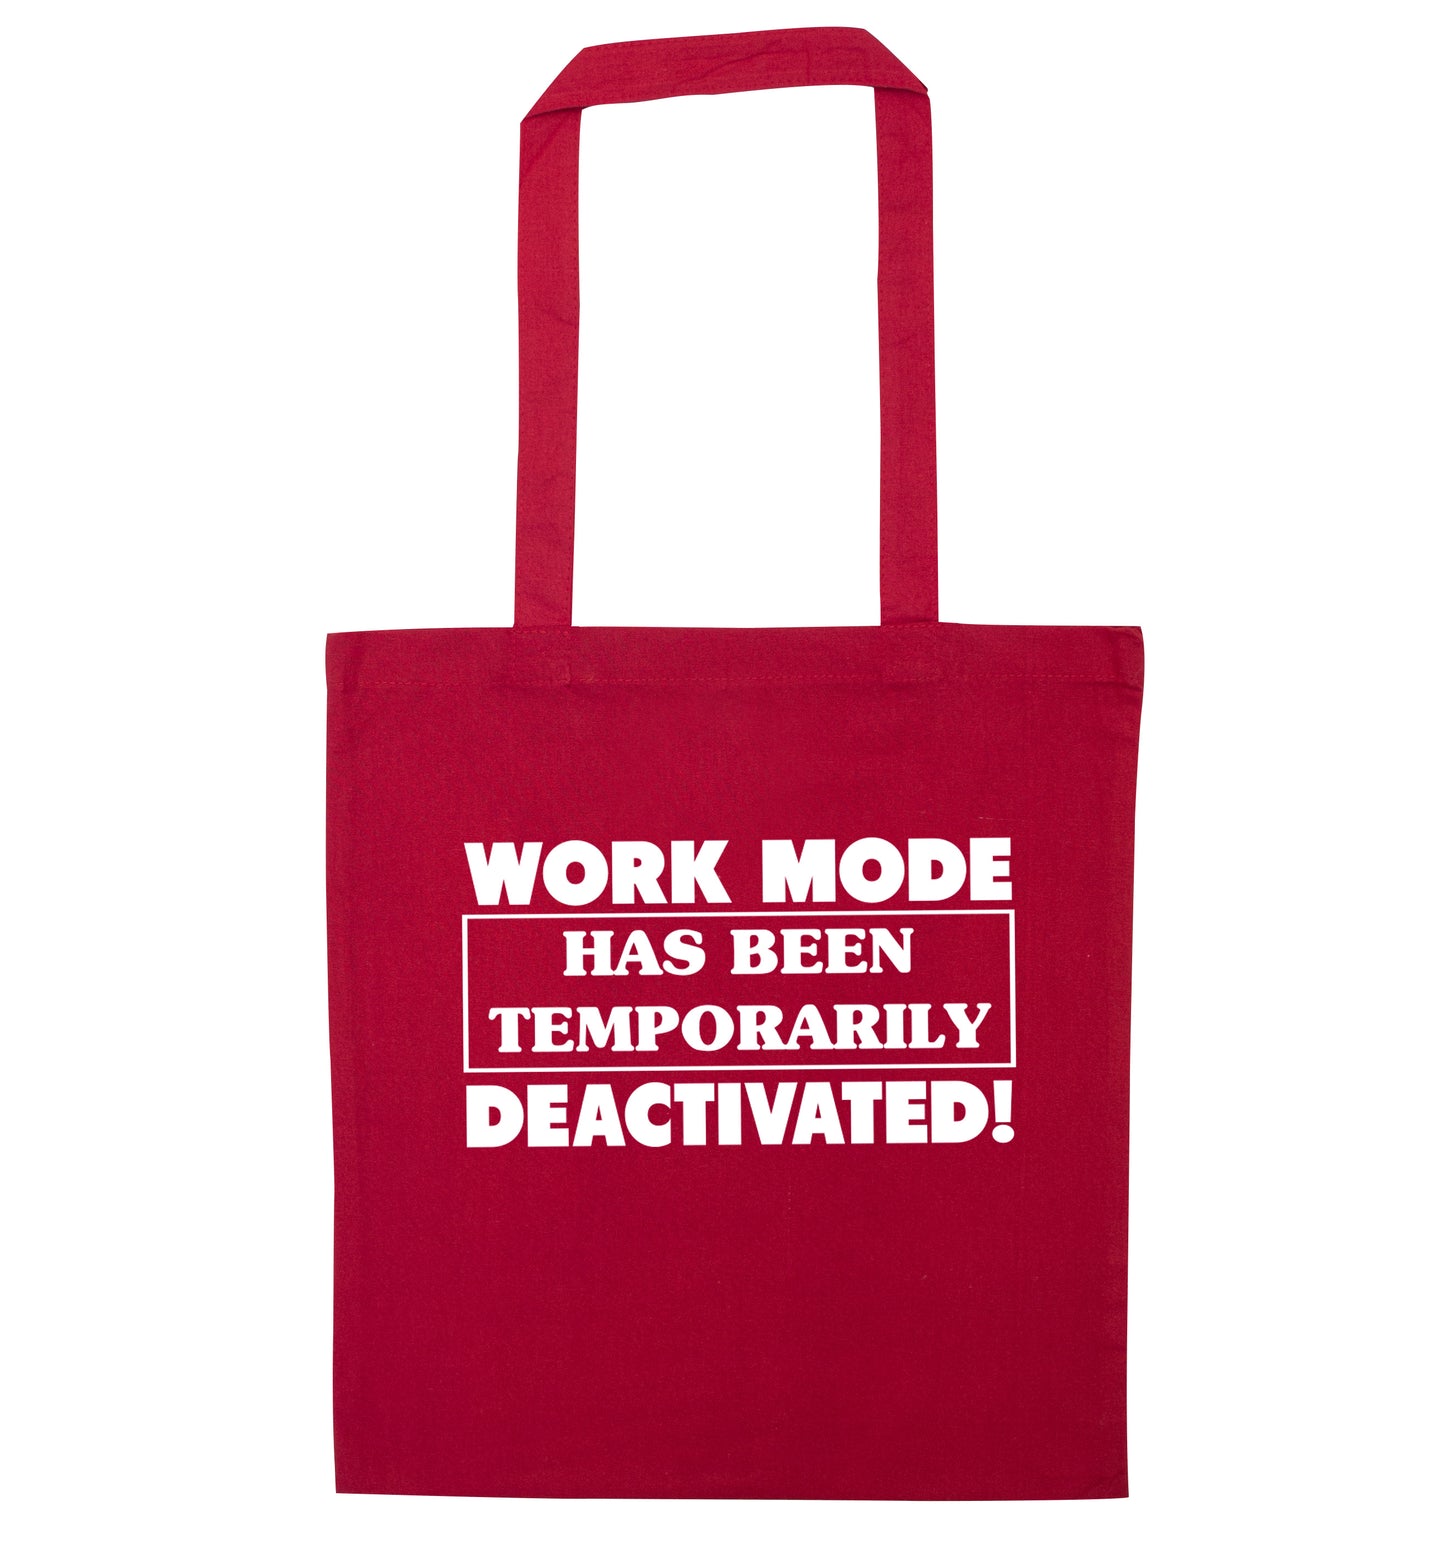 Work mode has now been temporarily deactivated red tote bag